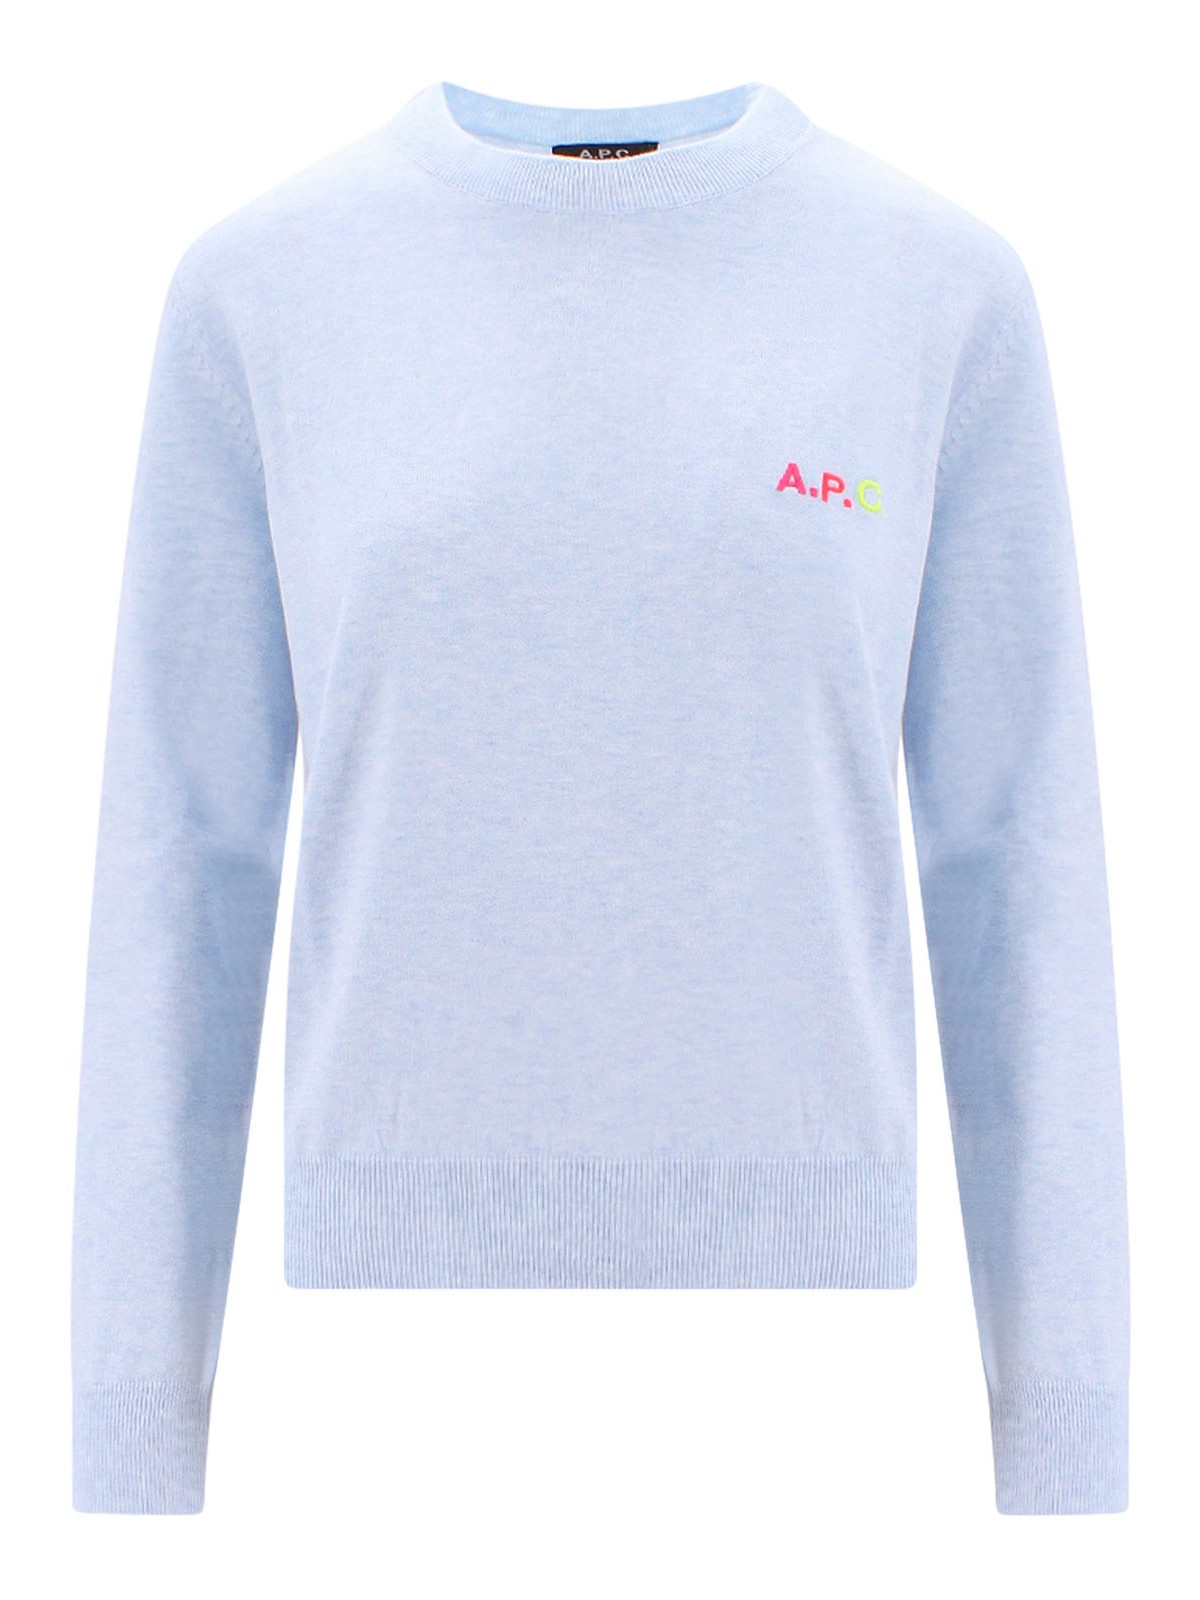 Apc Cotton Sweater With Embroidered Logo In Blue